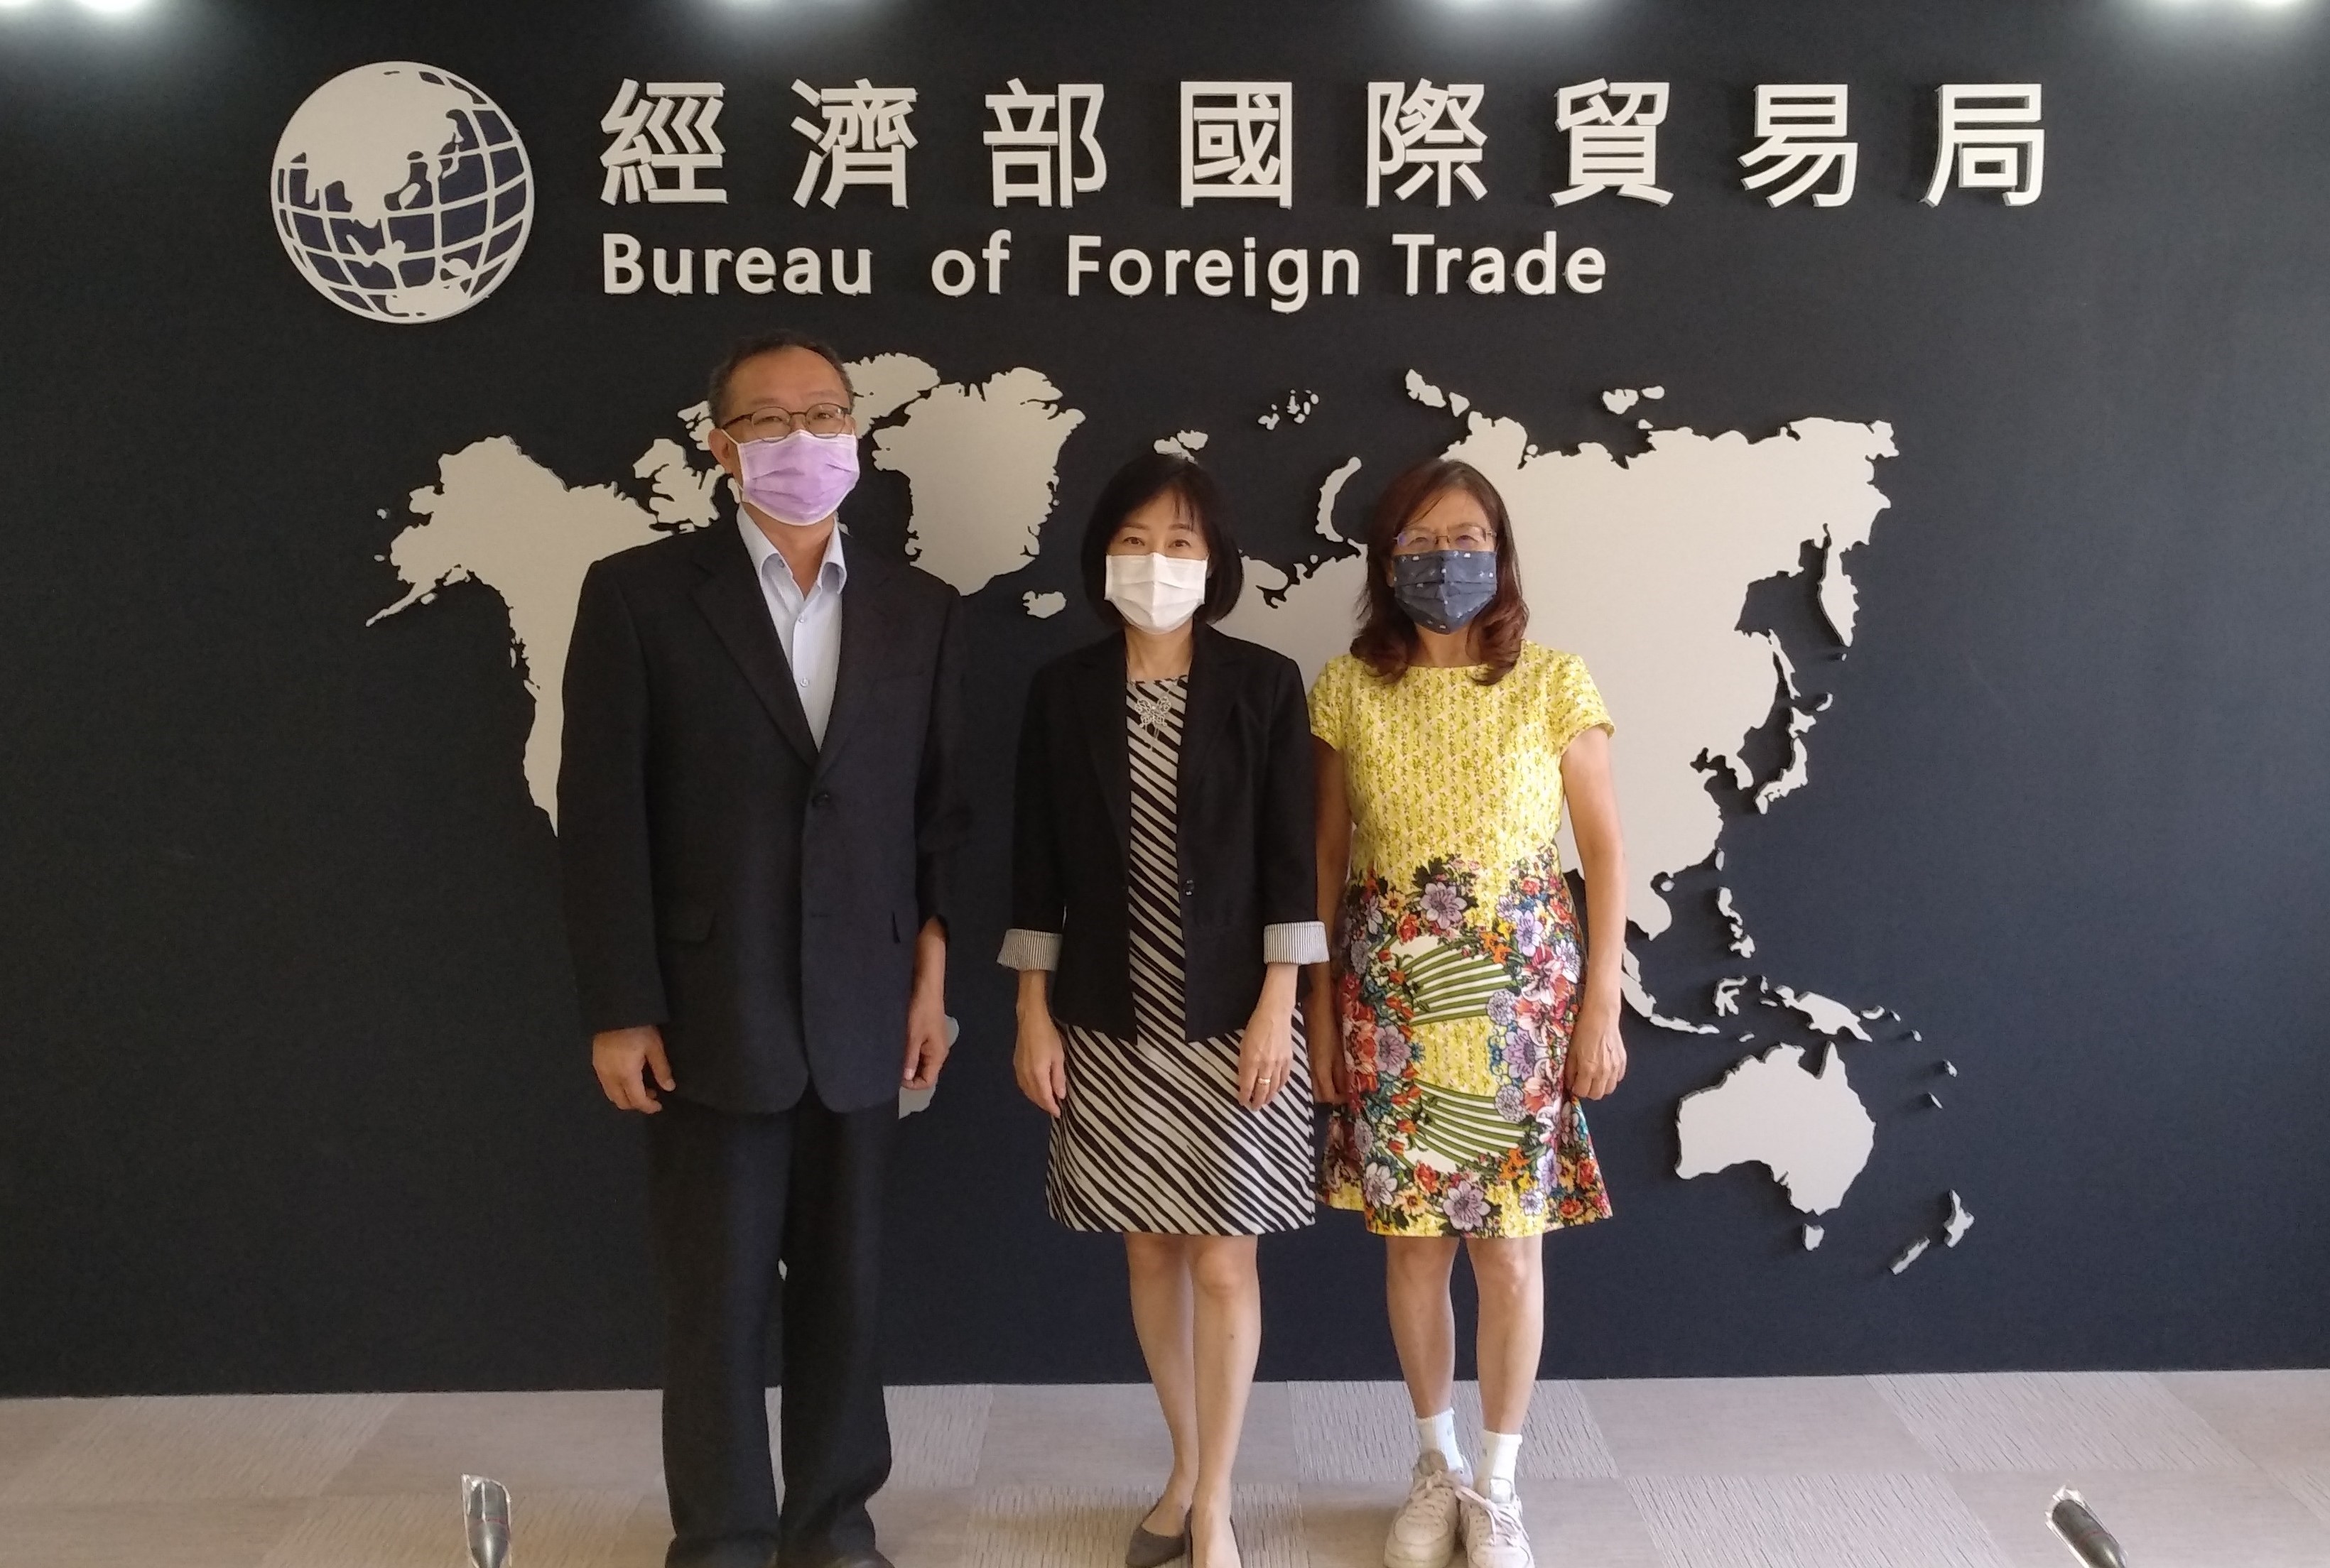 Director Jiang Met 2 Association Leaders to Discuss “Taiwan Food Machinery Marketing Meeting on Trade Promotion in African Countries”